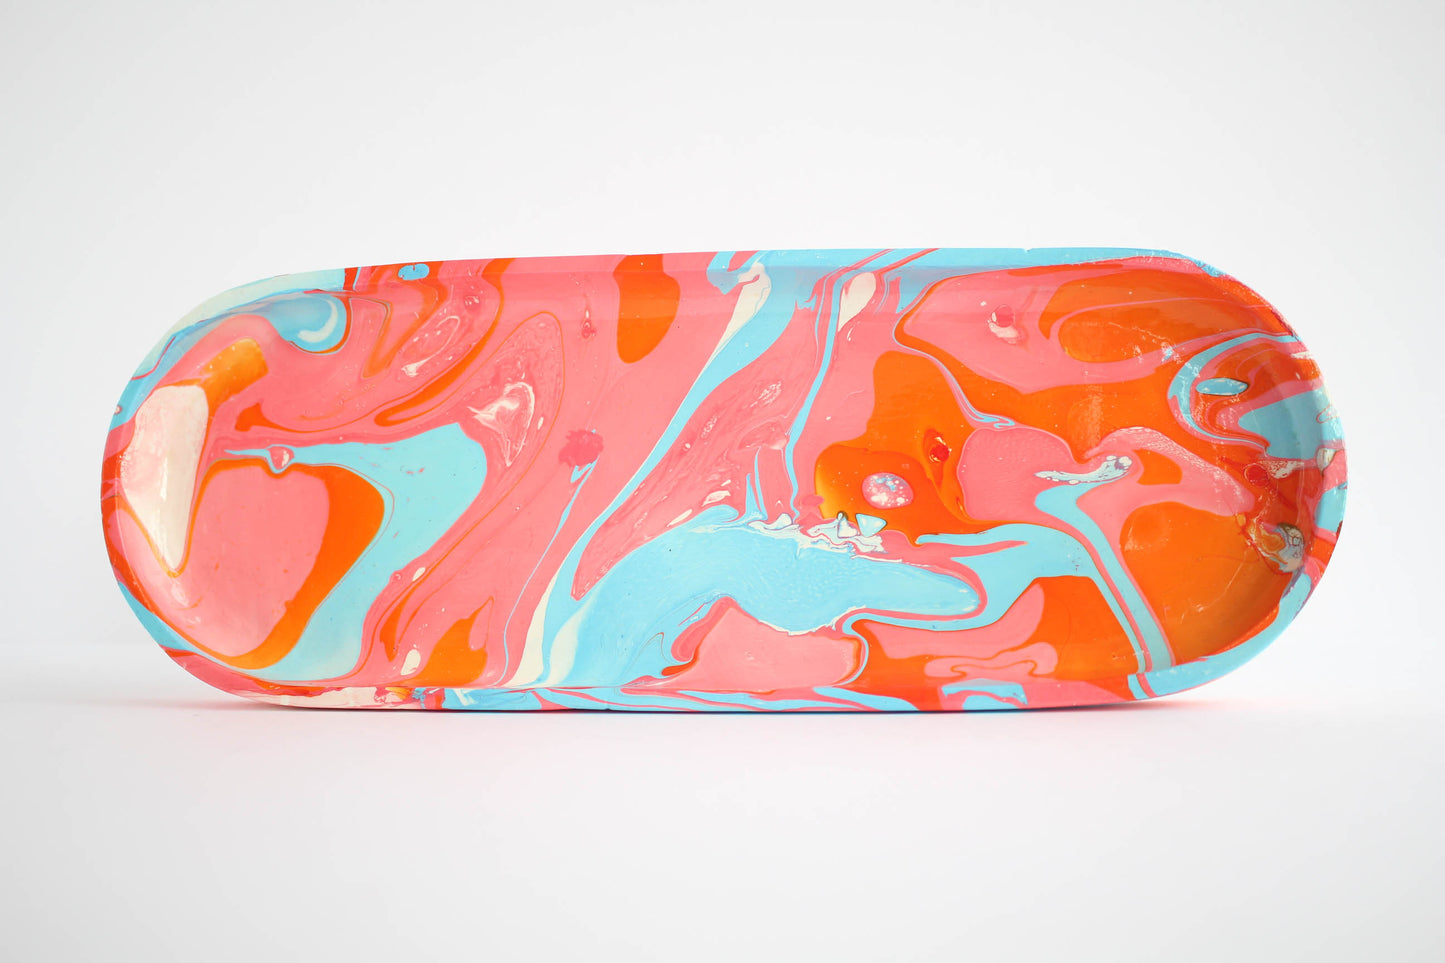 Miami Marbled Tray (Large)